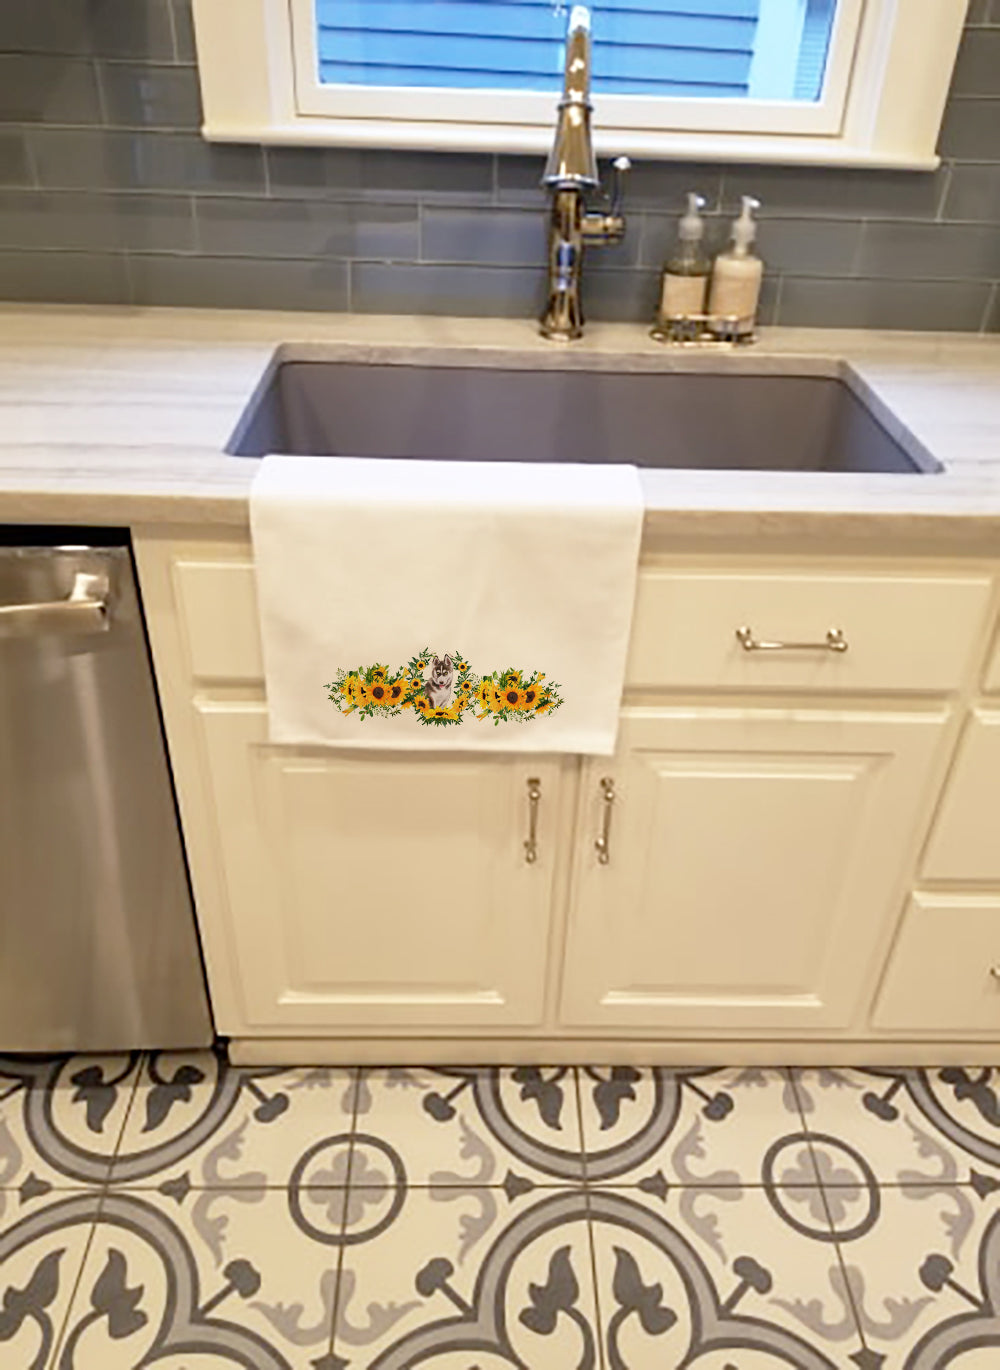 Buy this Siberian Husky Grey in Sunflowers White Kitchen Towel Set of 2